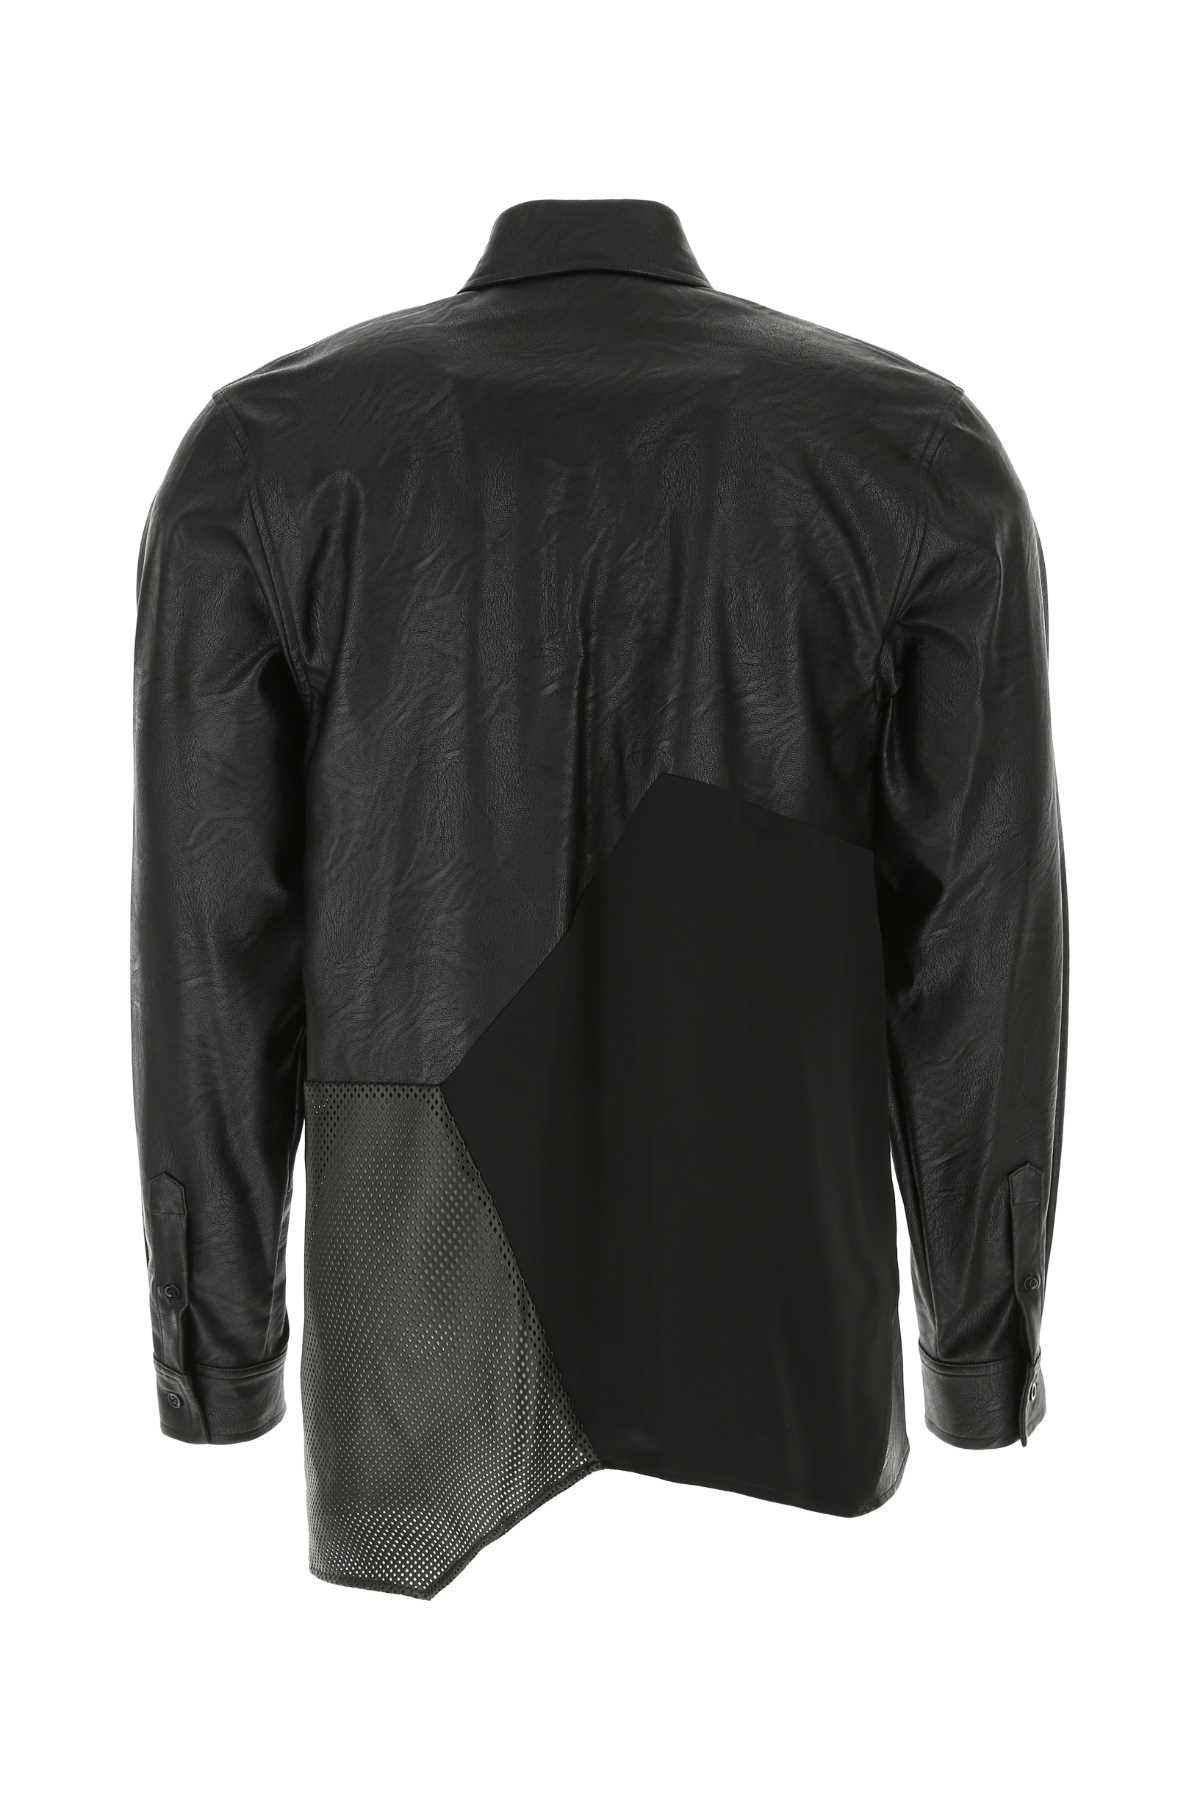 Koché Black Synthetic Leather And Satin Shirt In 900